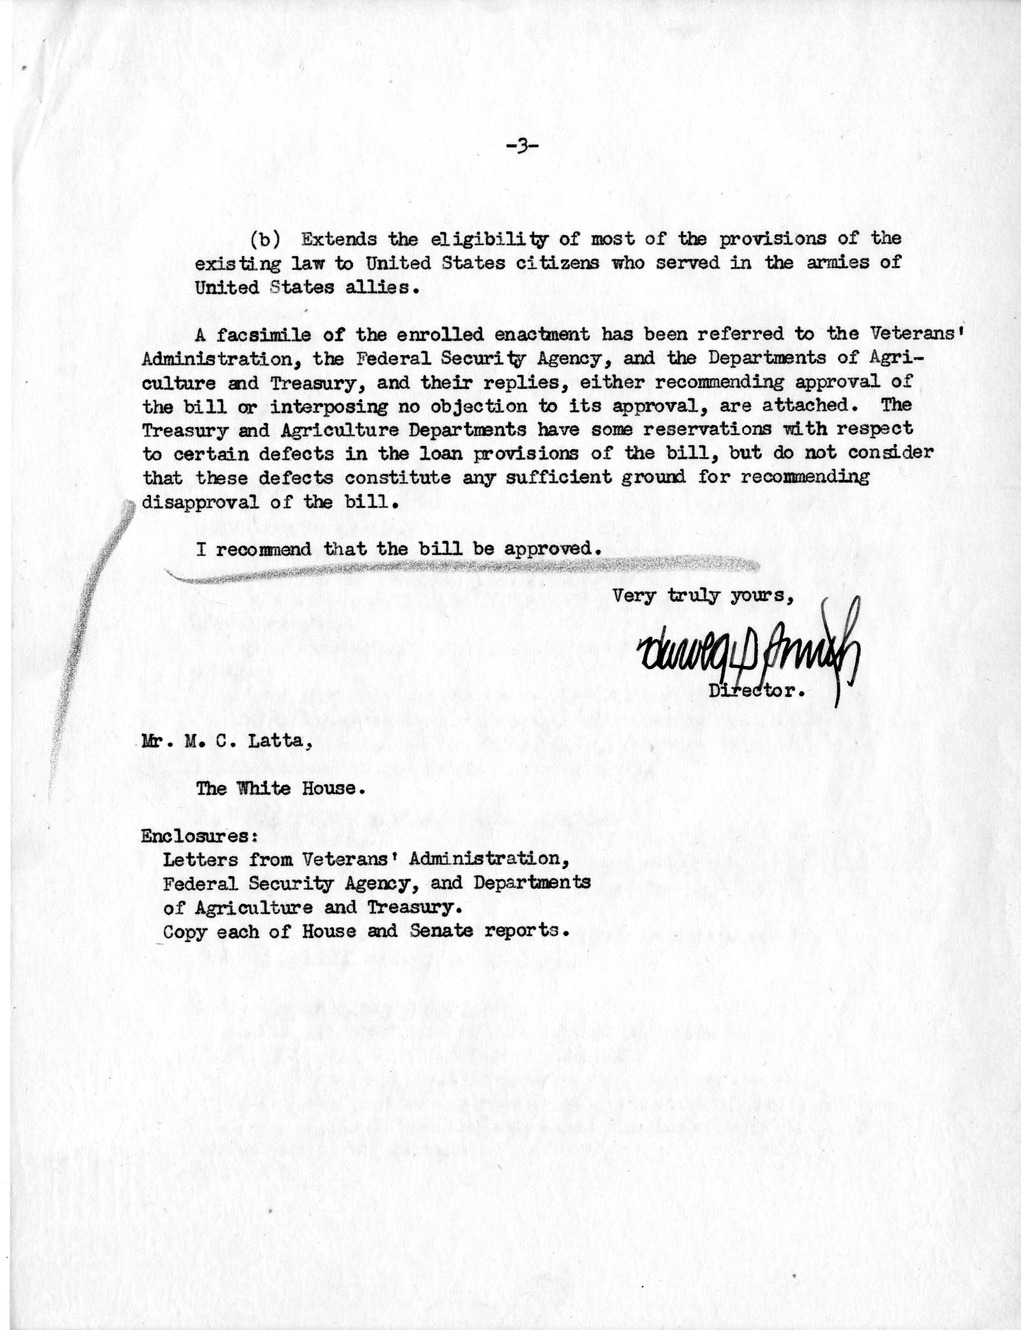 Memorandum from Harold D. Smith to M. C. Latta, H.R. 3749, To Amend the Servicemen's Readjustment Act of 1944, and for Other Purposes, with Attachments